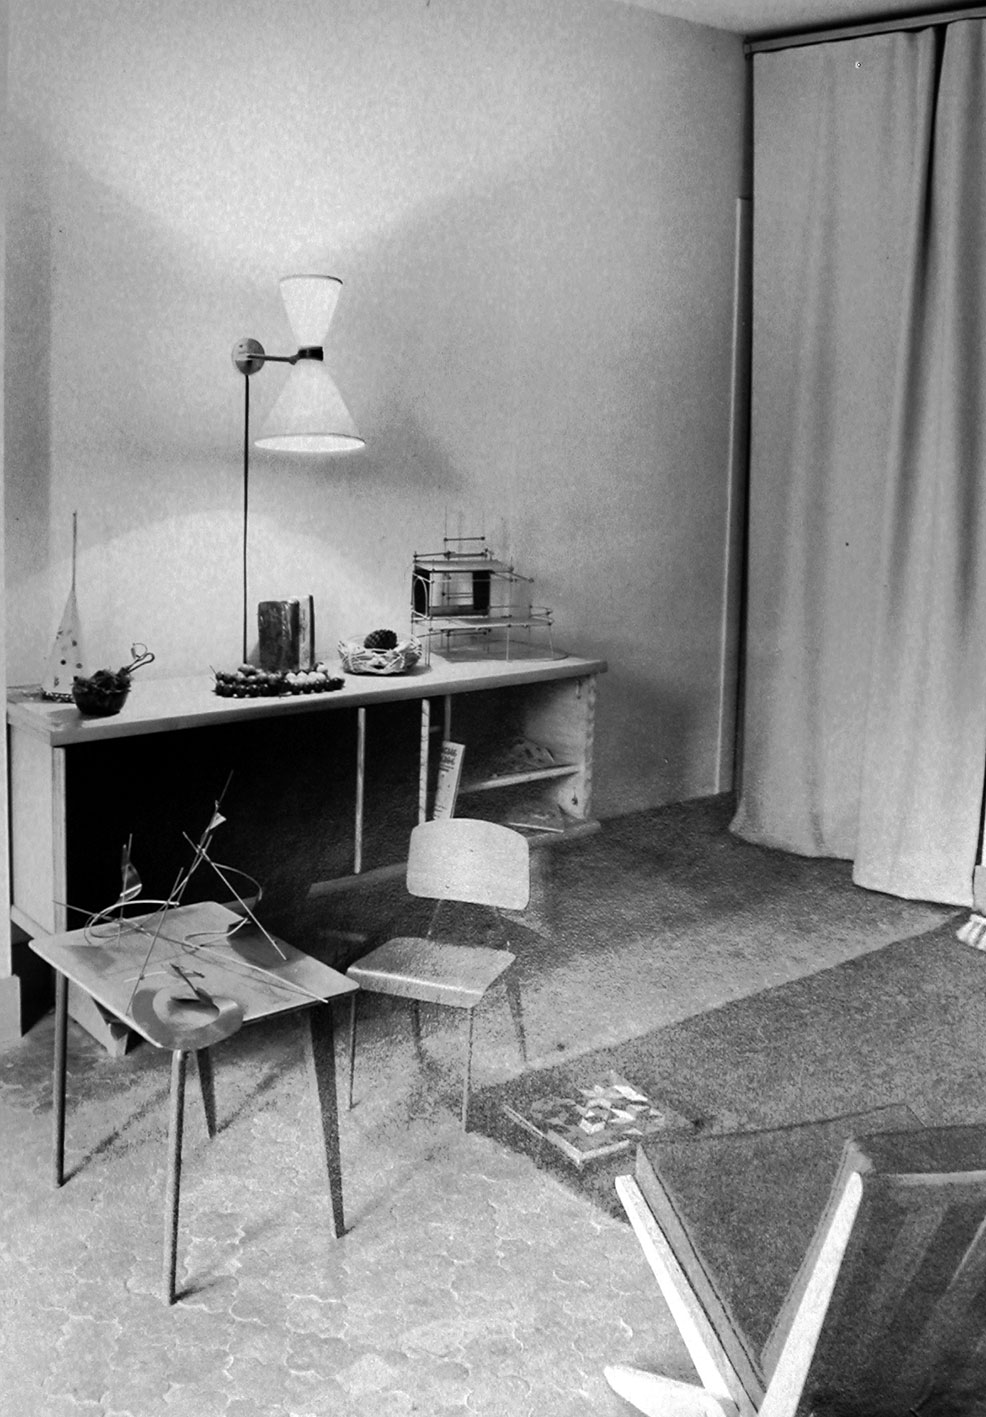 Prototype apartment for the building La Frontale, Toulon (architect J. de Mailly, Ch. Perriand, interior fitting, 1950–1955). Child’s bedroom with the Ensemble Maternelle. Life-scale presented at the Salon des Arts Ménagers, Paris, 1951.